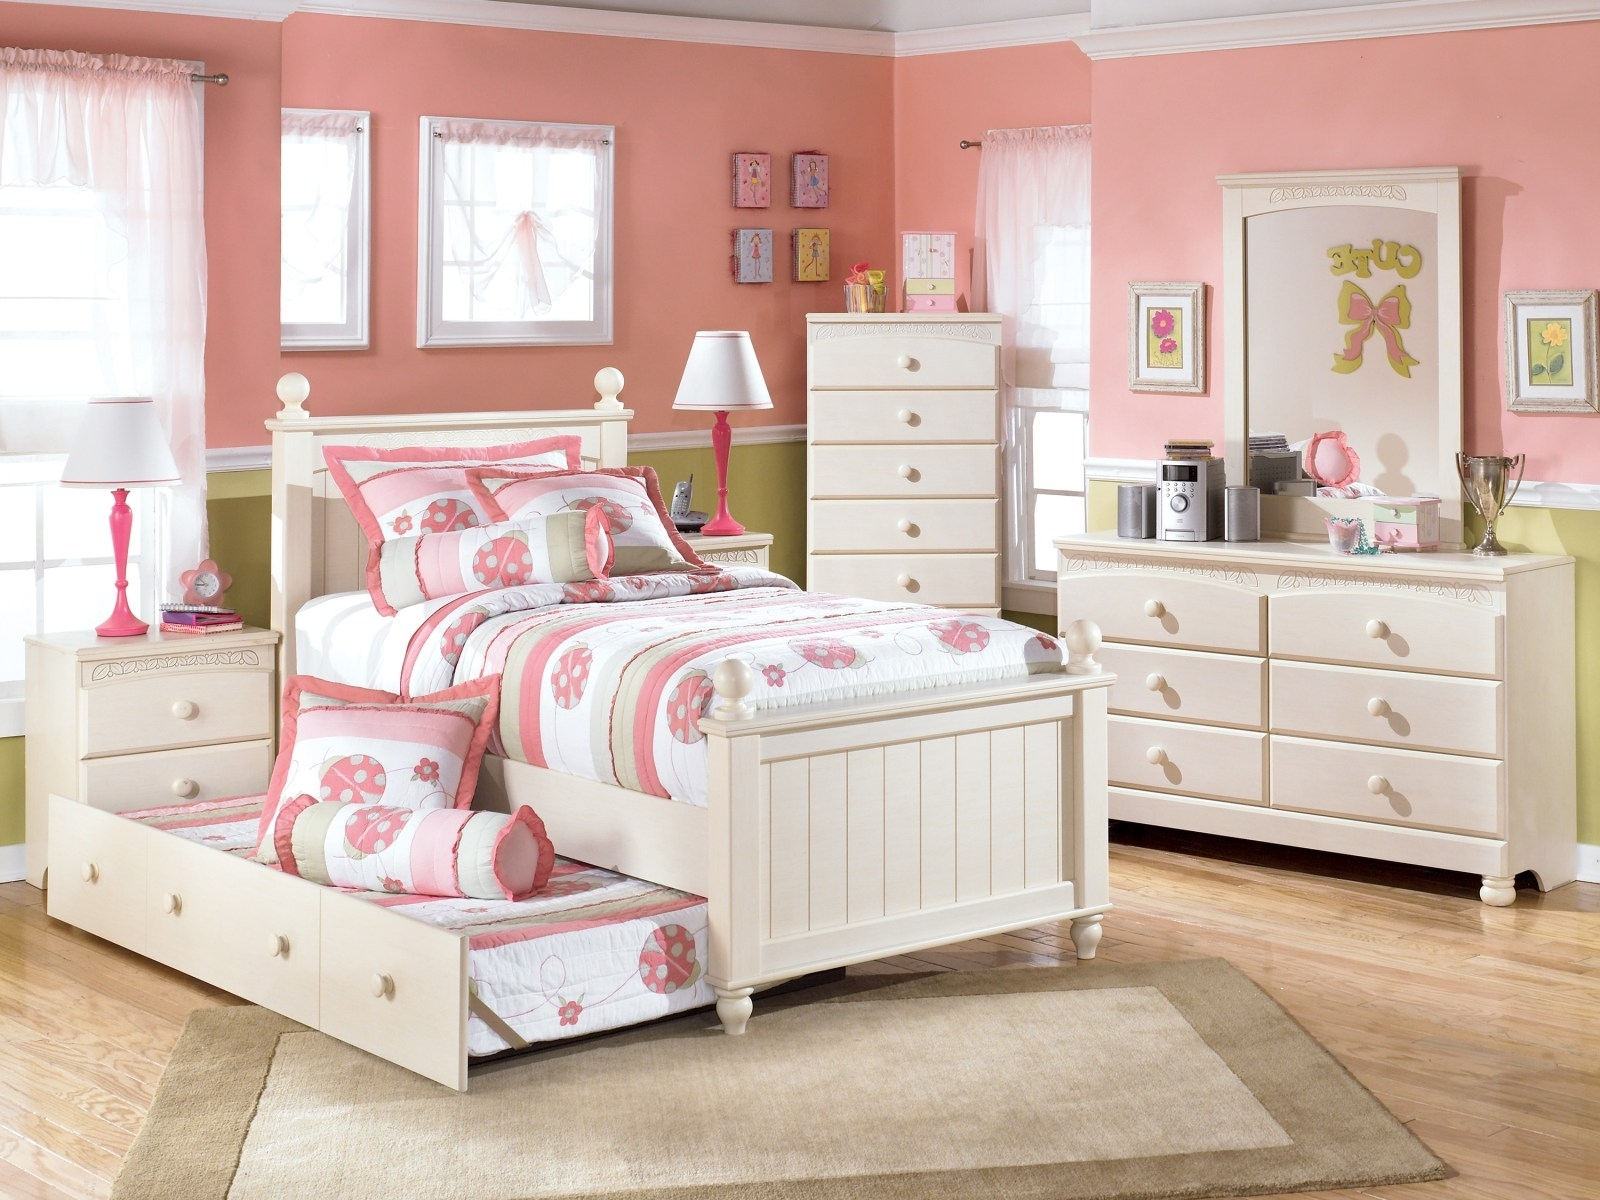 Girls Bedroom Sets Suitable Combine With Twin Bedroom Sets For Girls for sizing 1600 X 1200